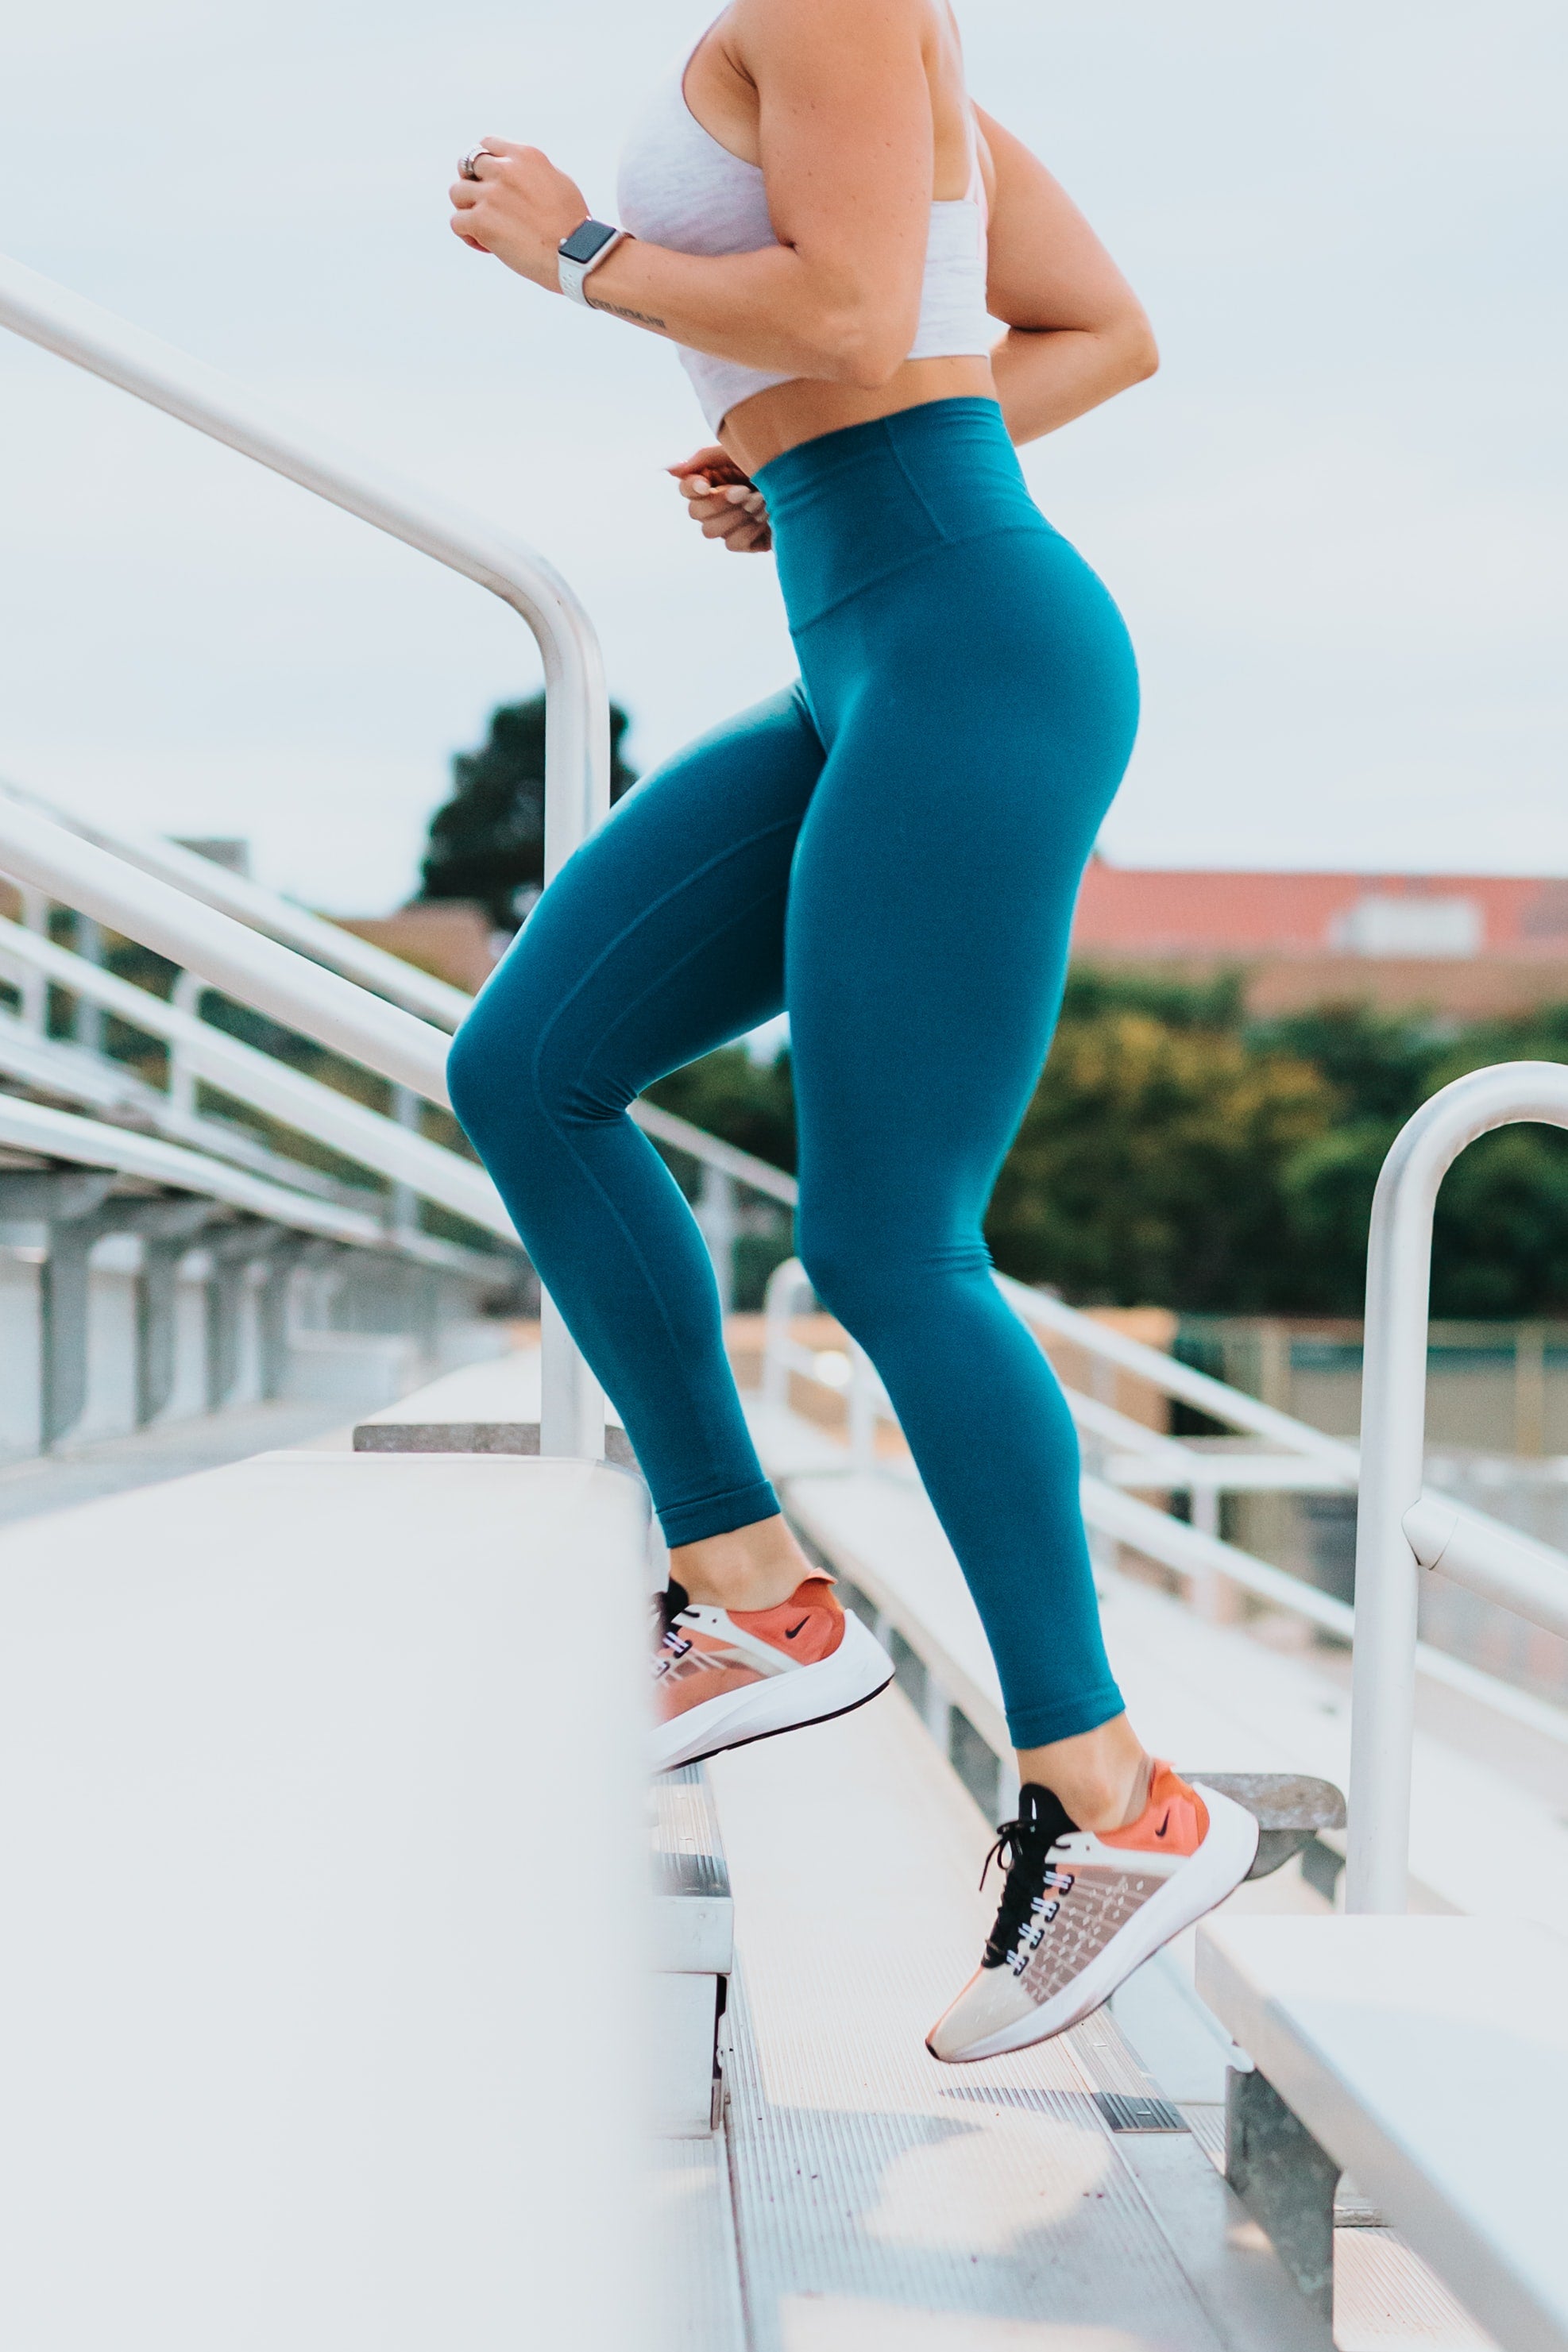 fit woman running up stairs